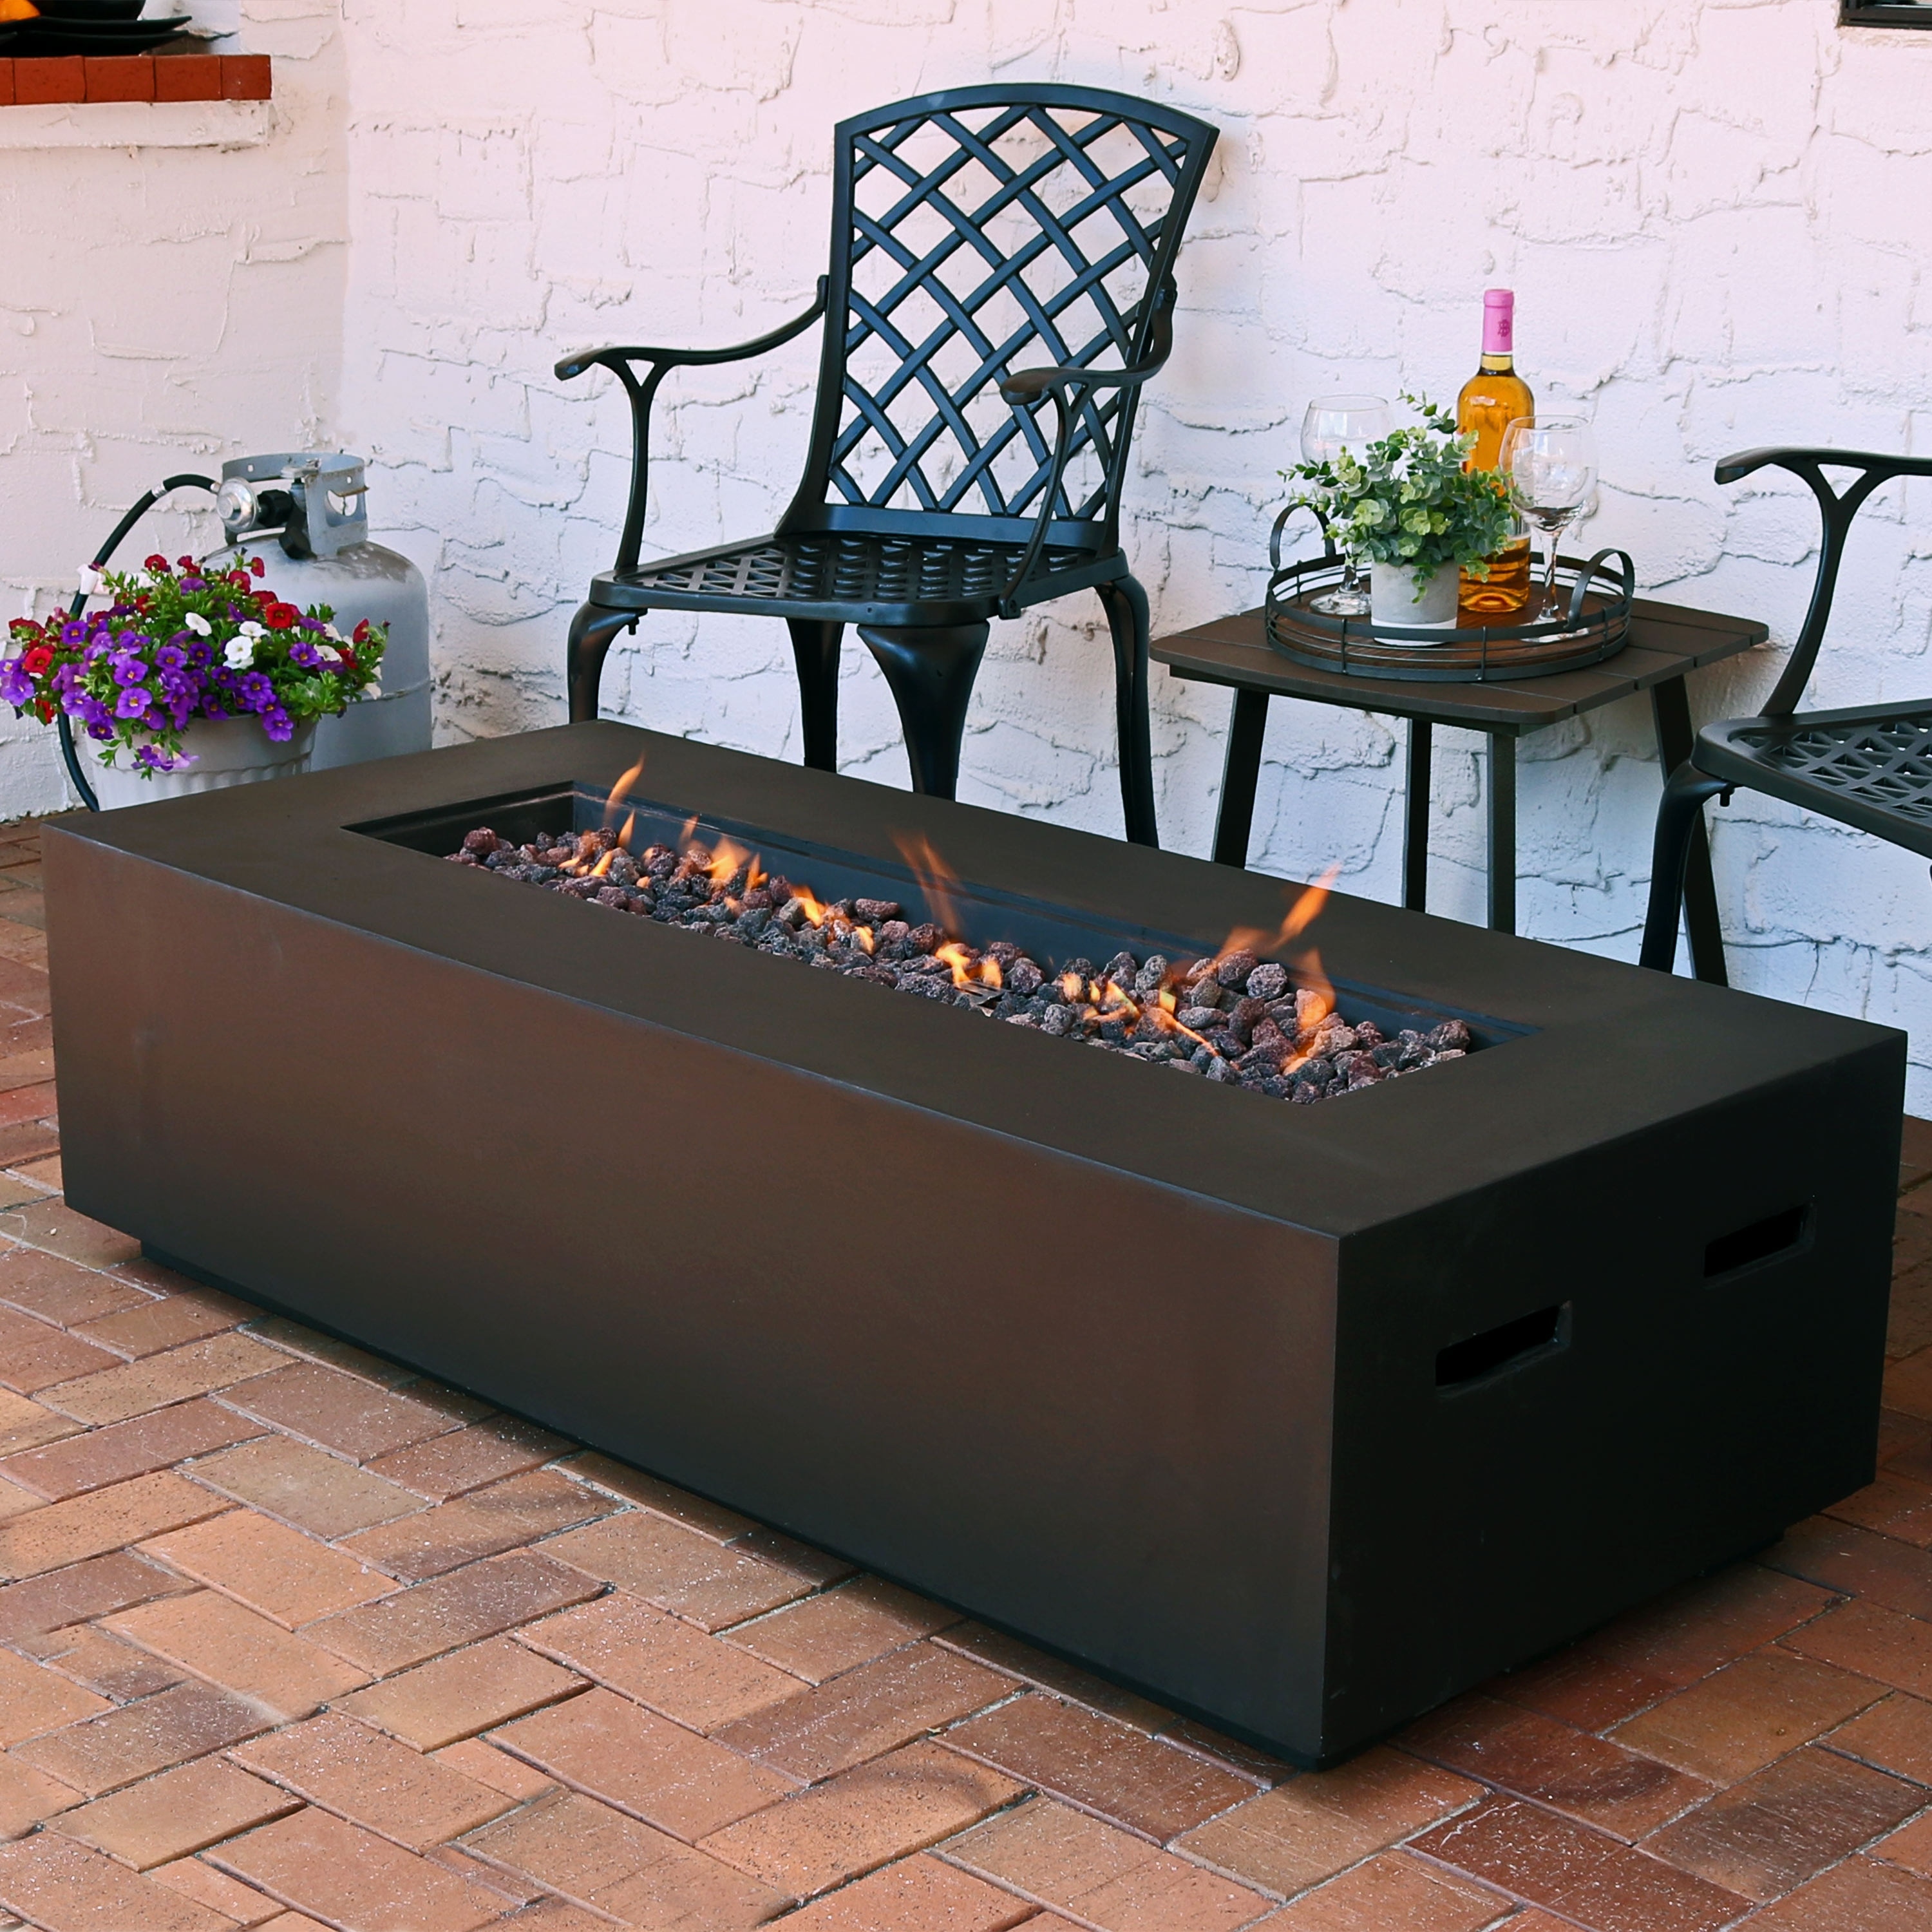 Sunnydaze Decor Brown LP Gas Modern Fire Pit Coffee Table with Cover and Lava Rocks - 56 inch